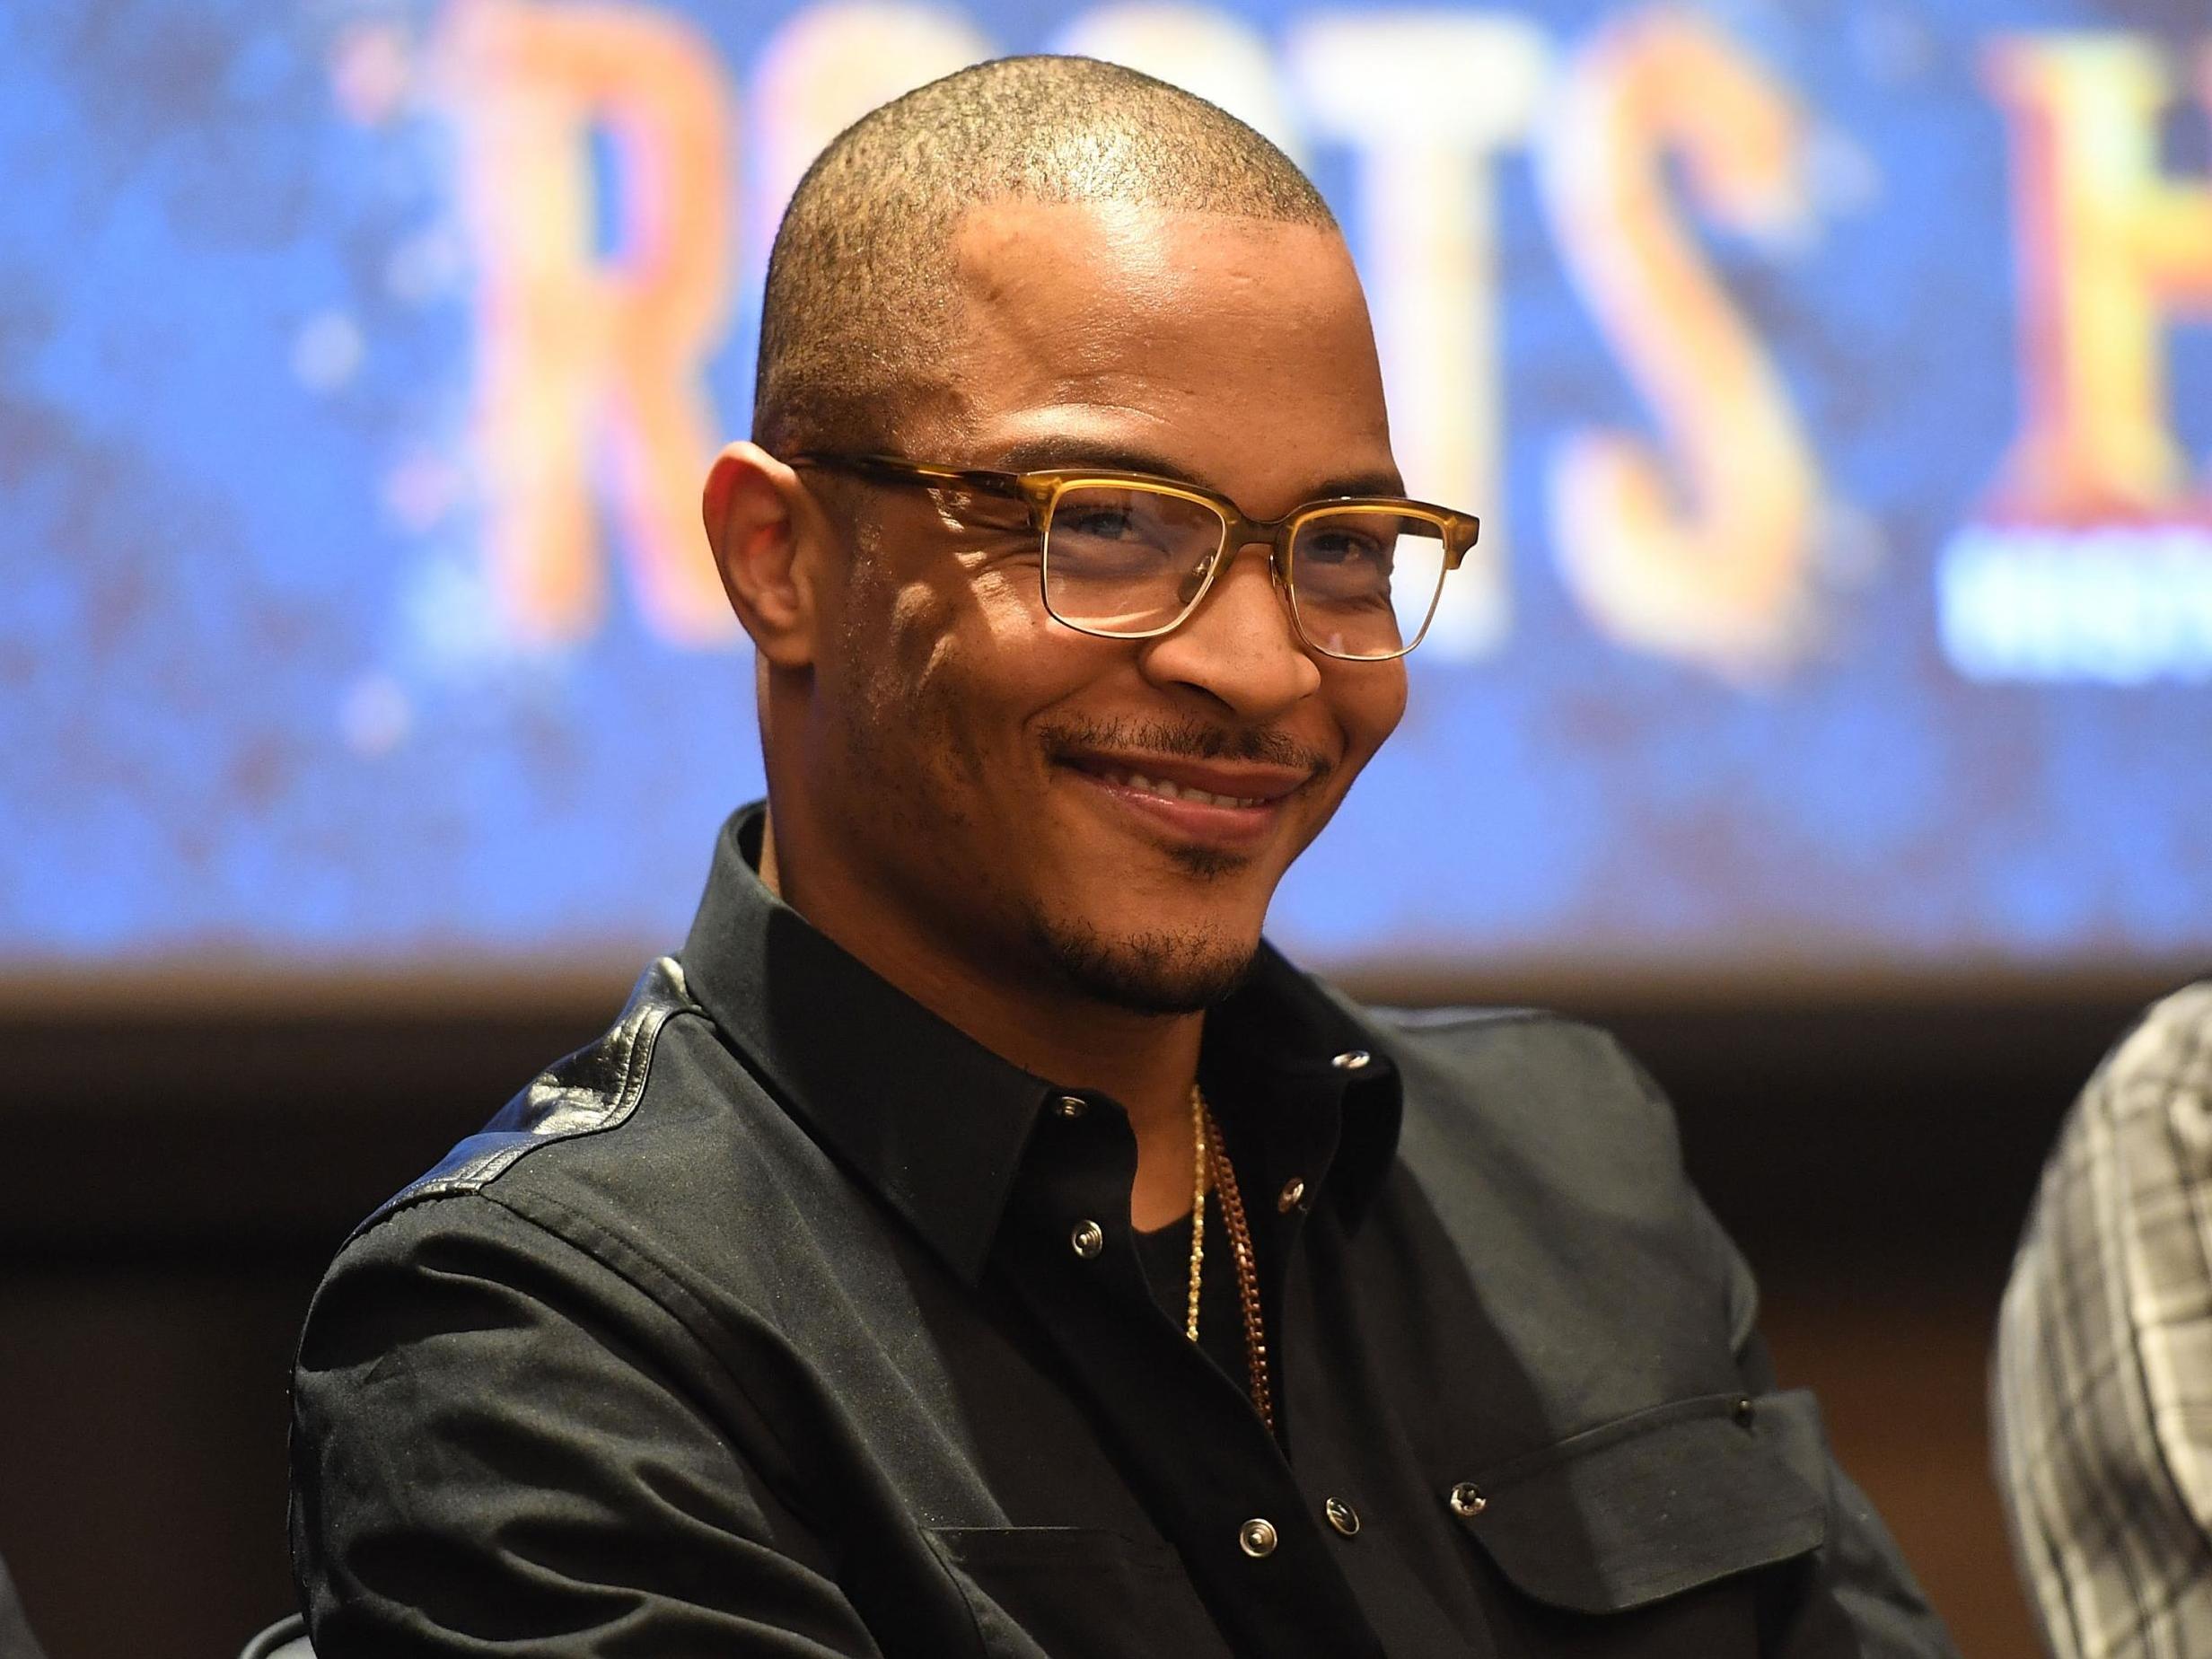 Rapper and actor TI